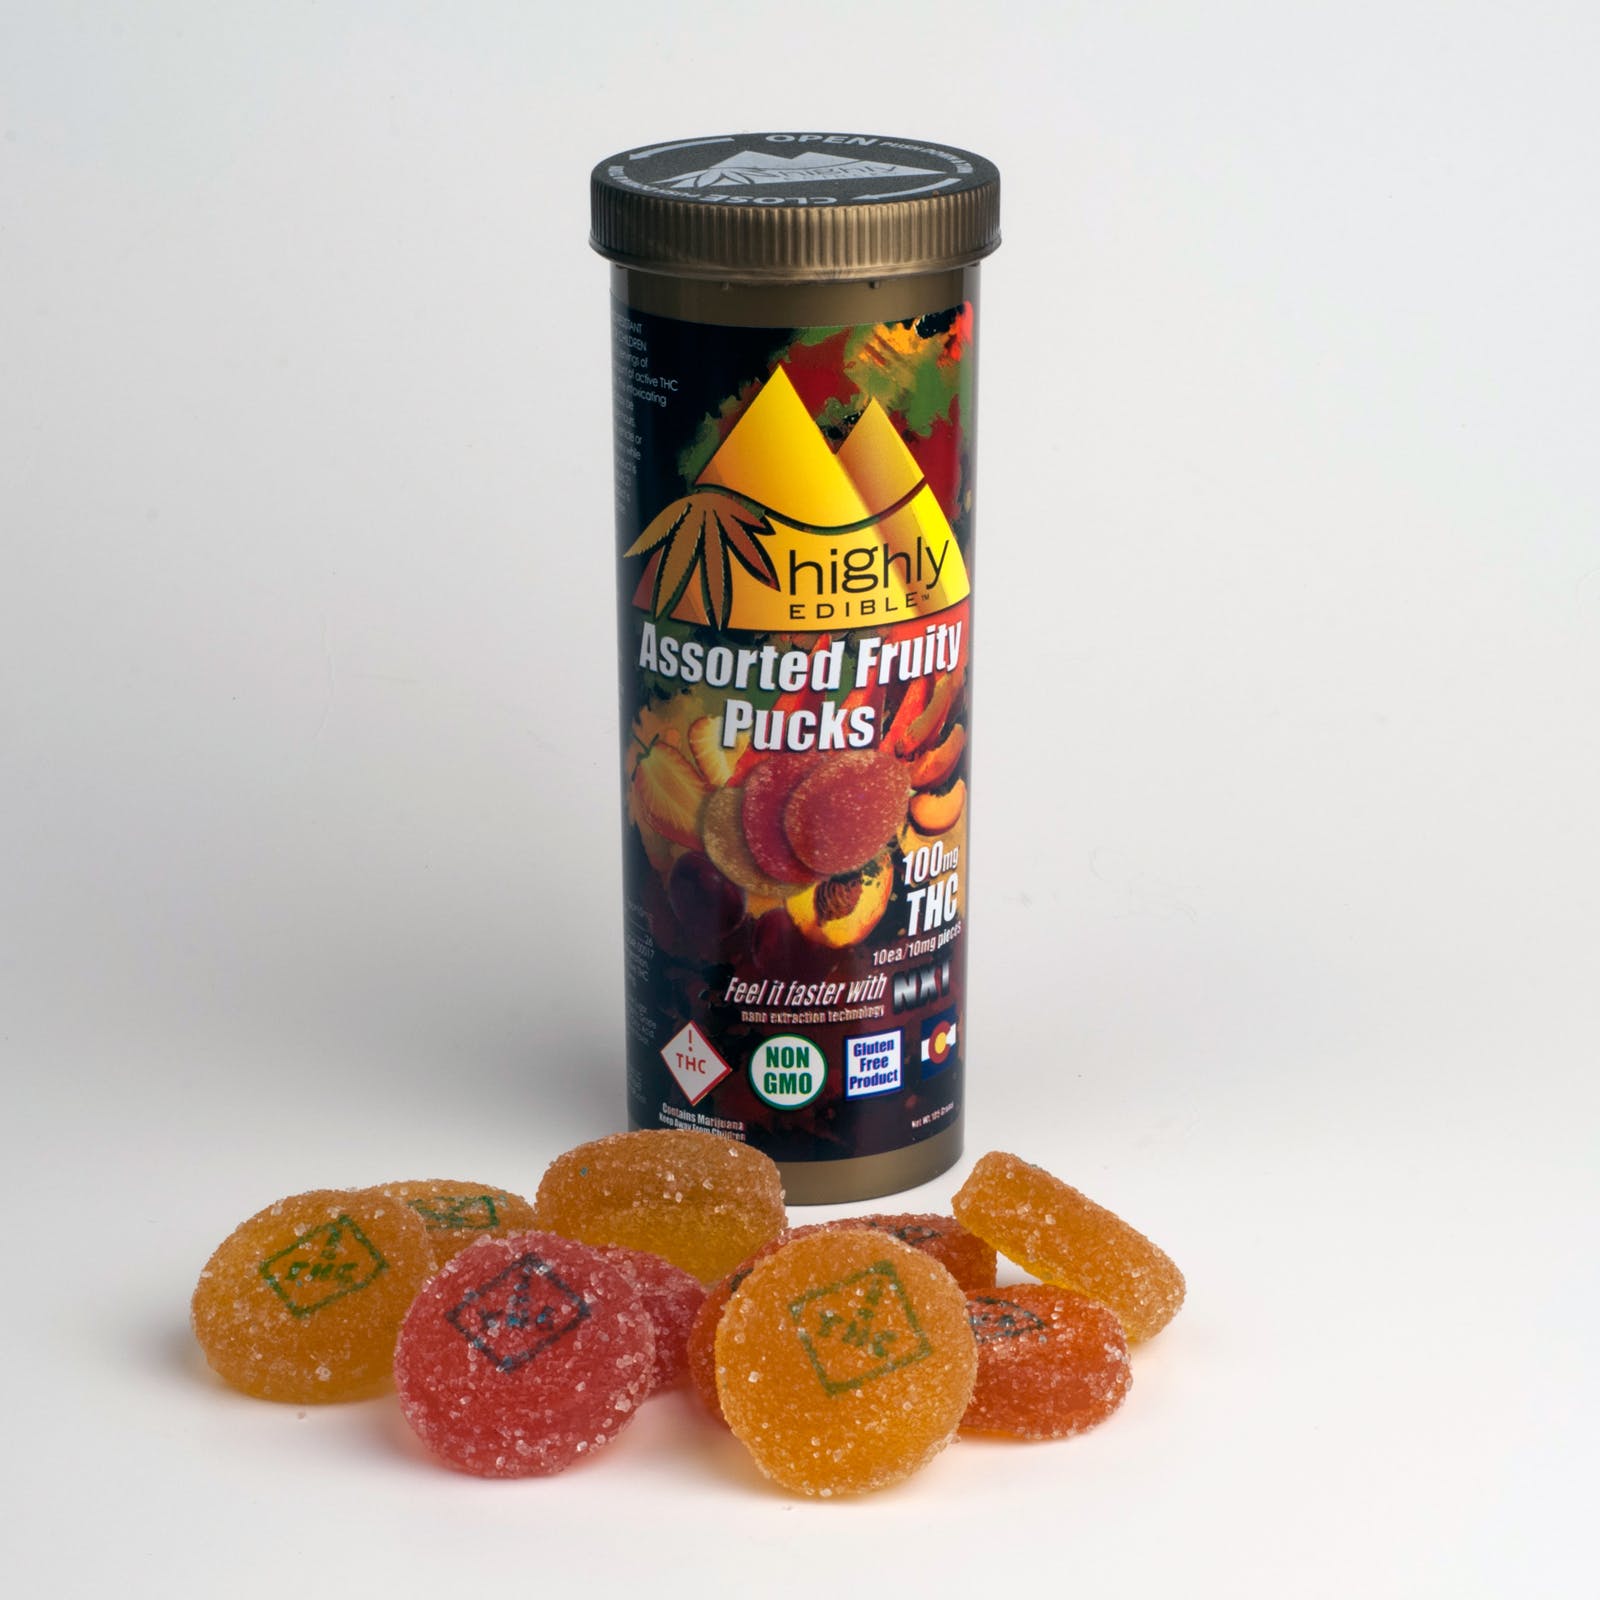 edible-highly-edible-gummies-250mg-assorted-fruit-pucks-tax-included